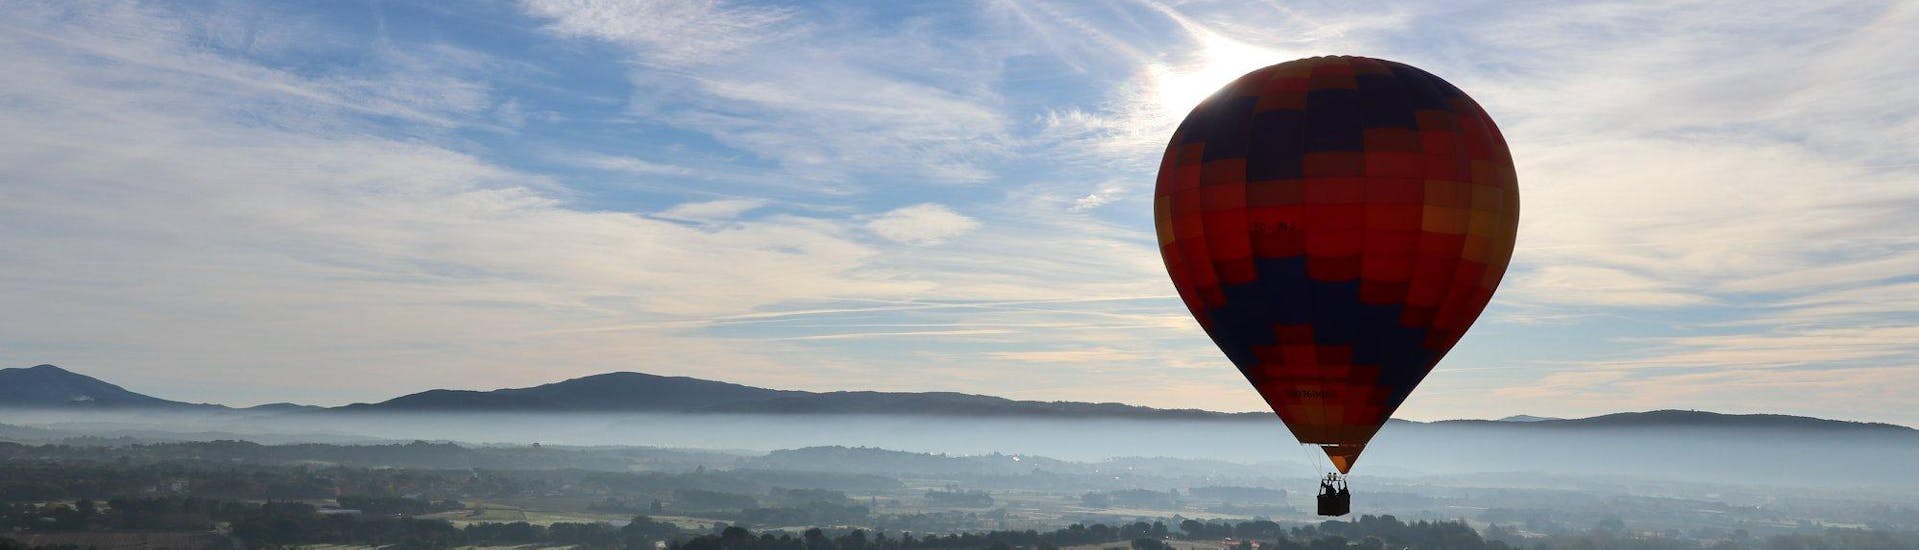 Private Balloon Ride for Two in Vic with Globus Barcelona - Hero image